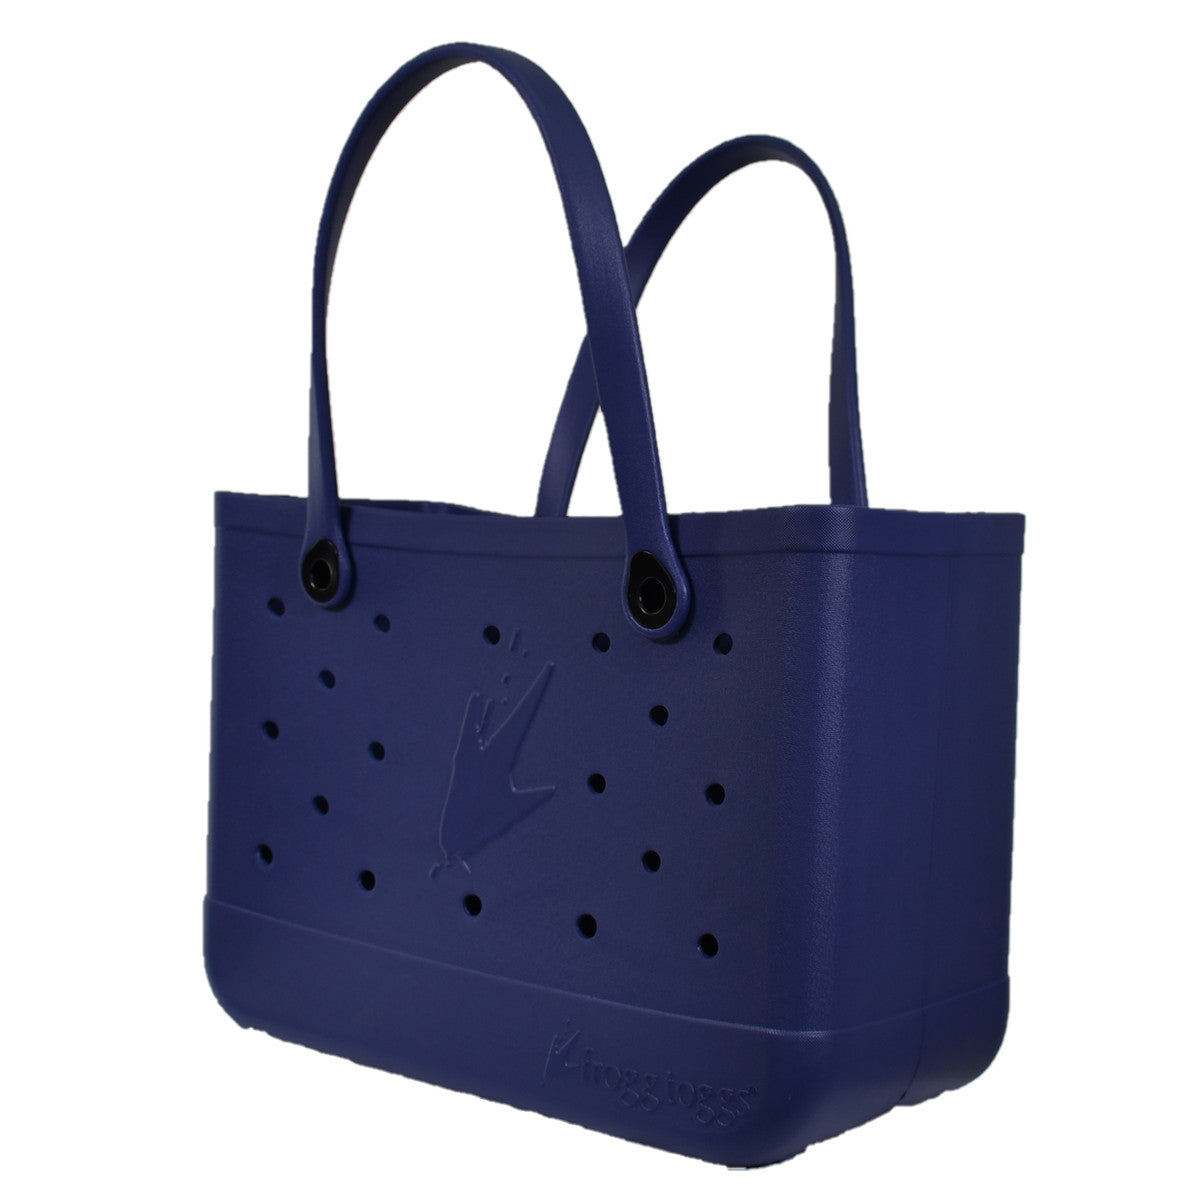 FROGG TOGGS Fishing Tote, Secures Organizes and Protects